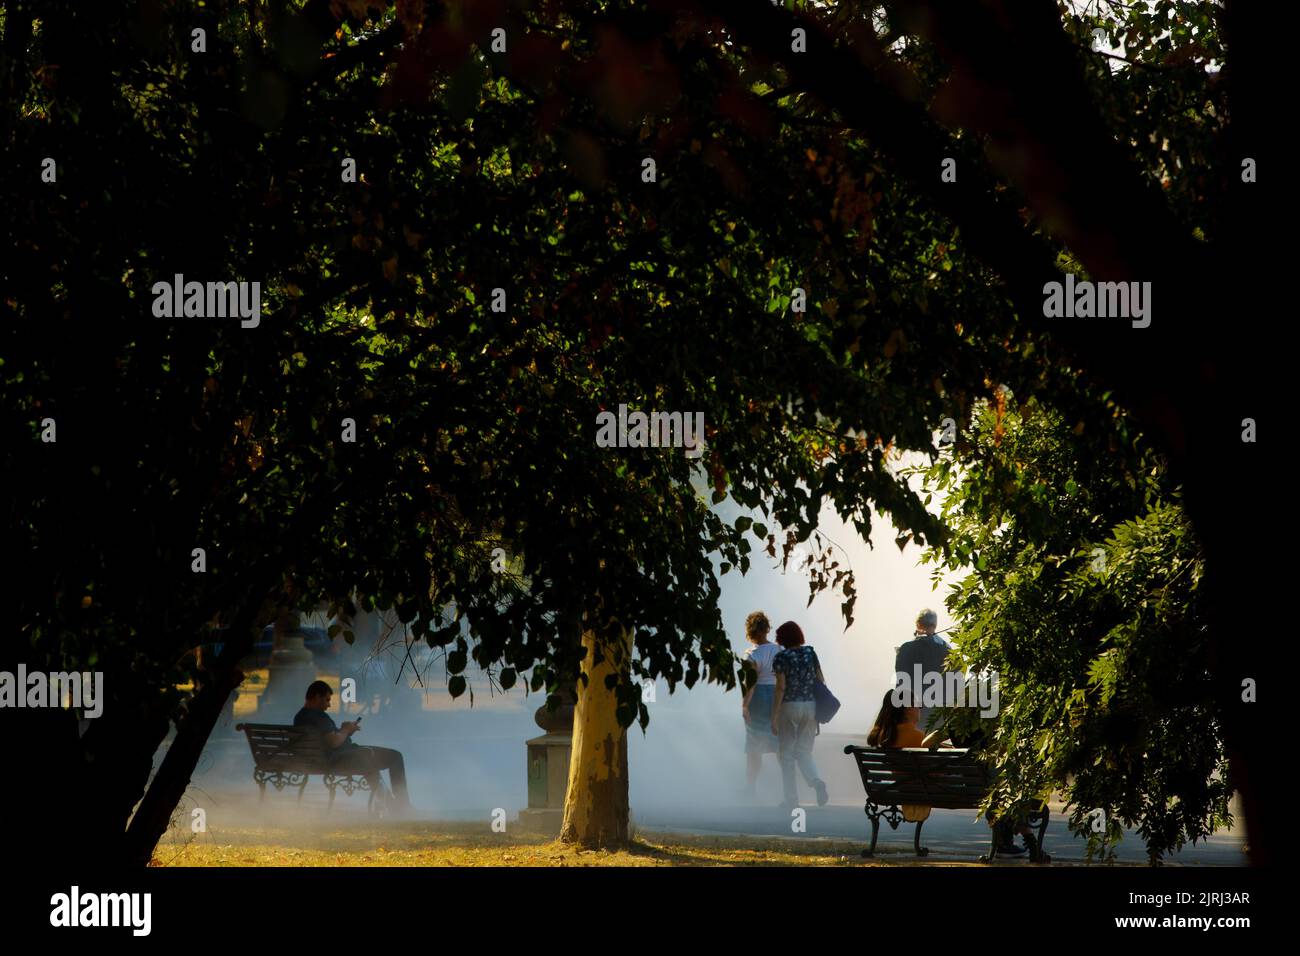 Bucharest, Romania - August 11, 2022: People walk under the trees near the water fountains in the park on a very hot day This image is for editorial u Stock Photo